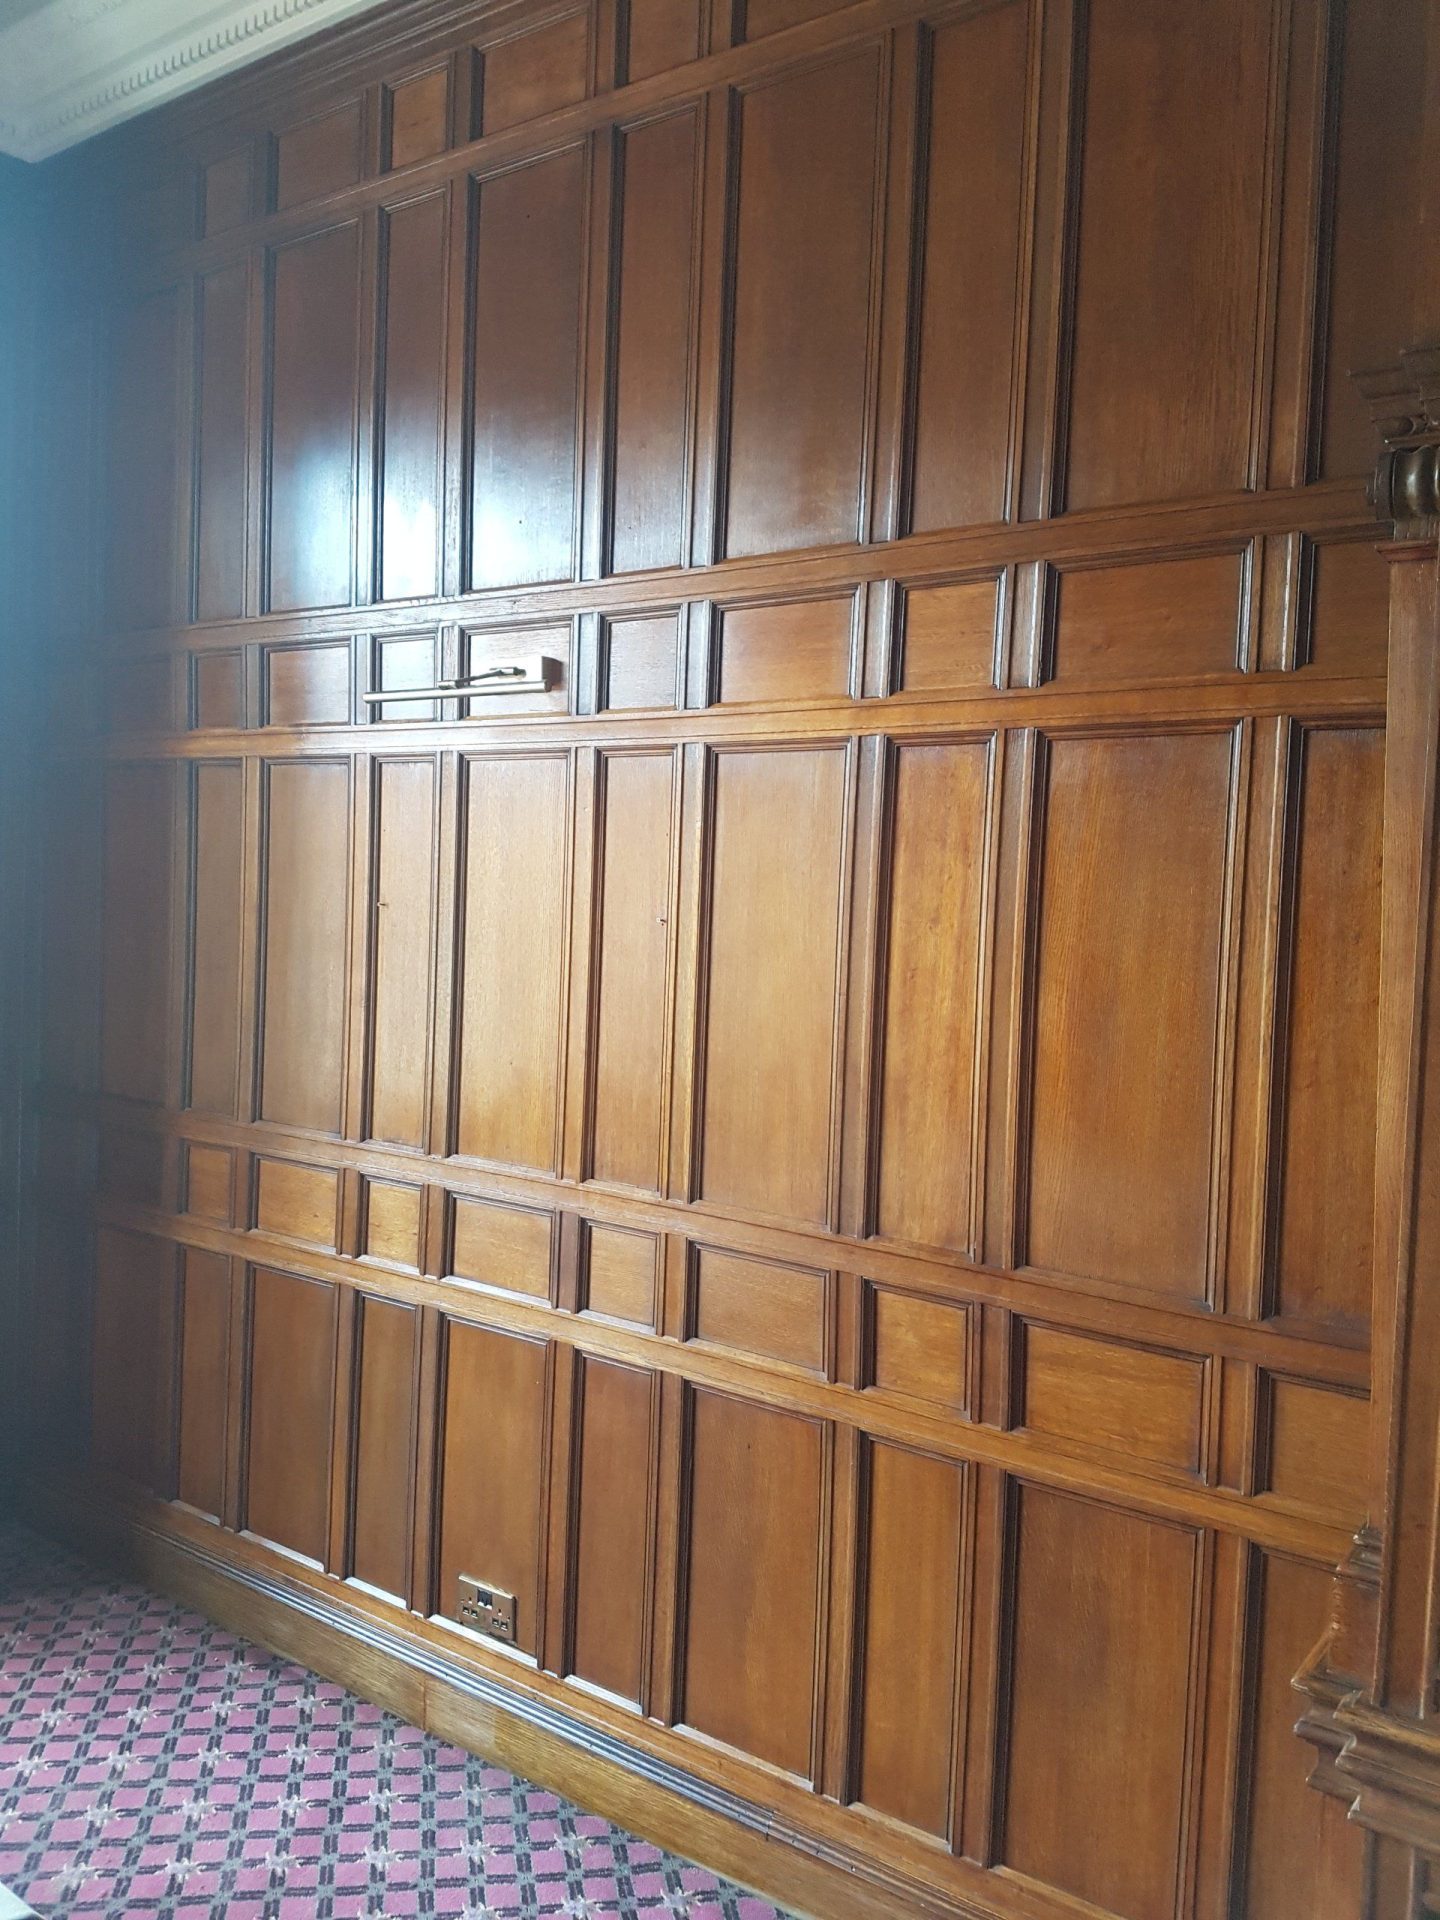 Stained, french polished & waxed oak wooden wall panels